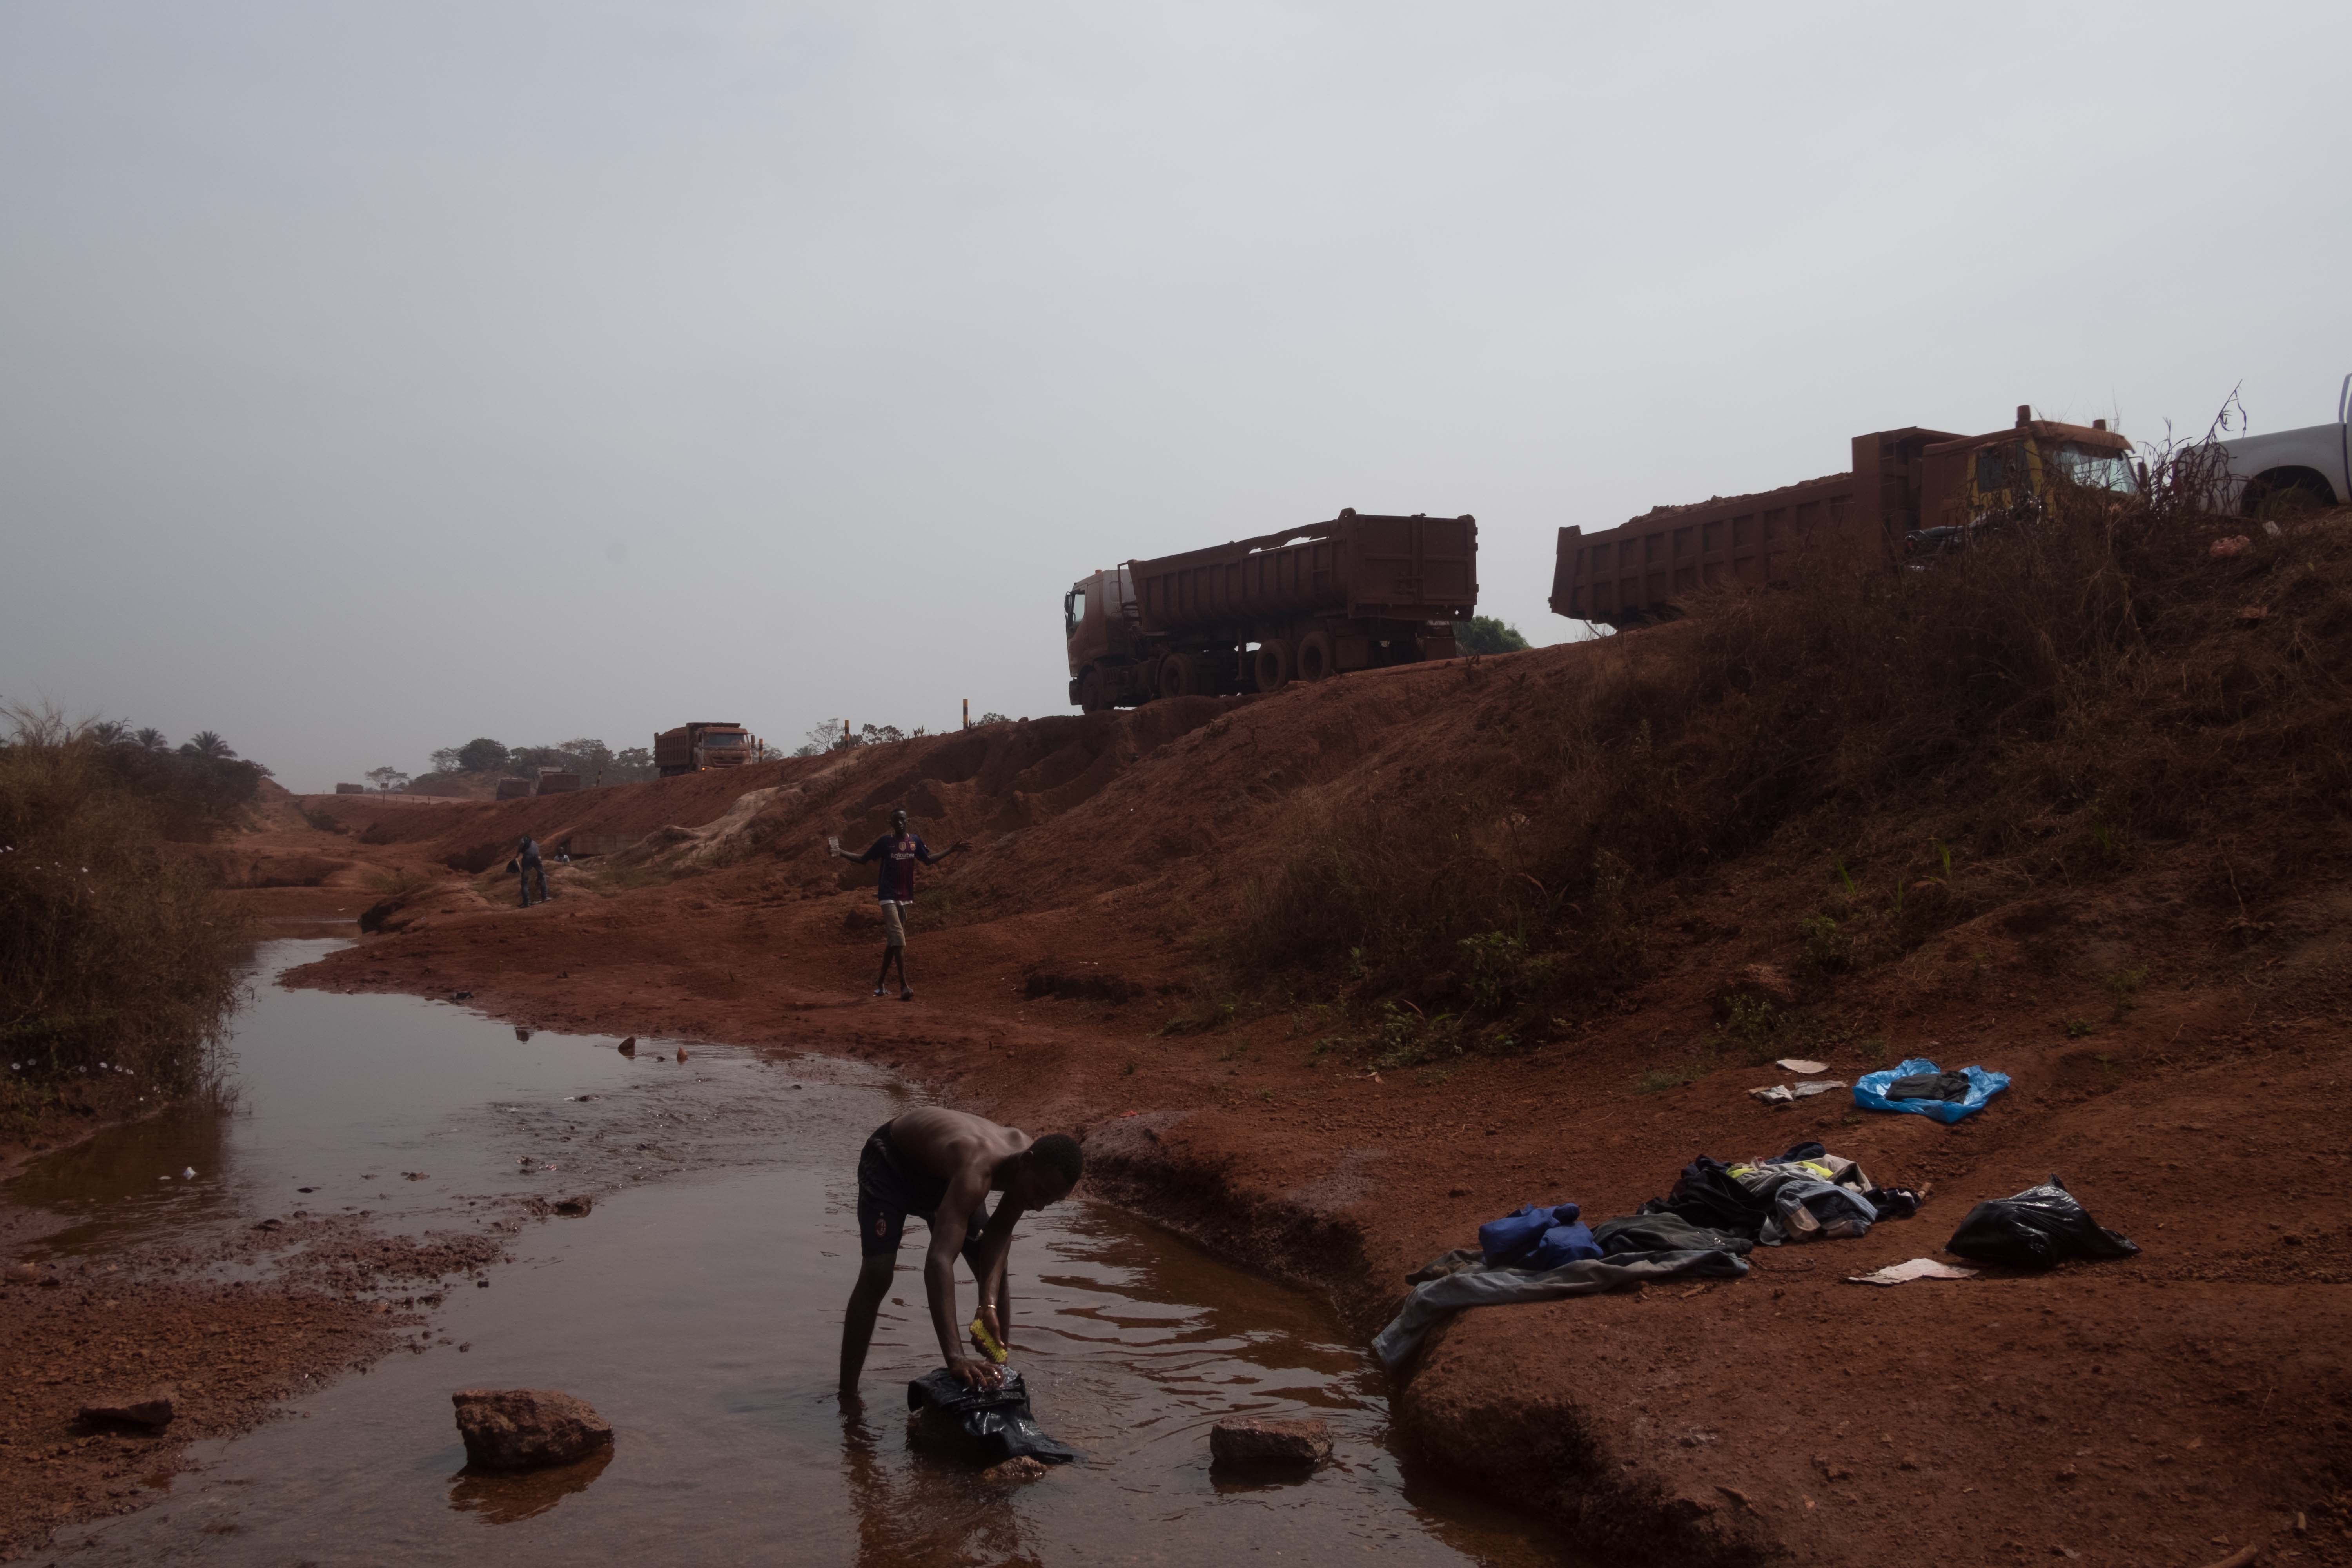 A man washing his clothes in a river next to a mining road